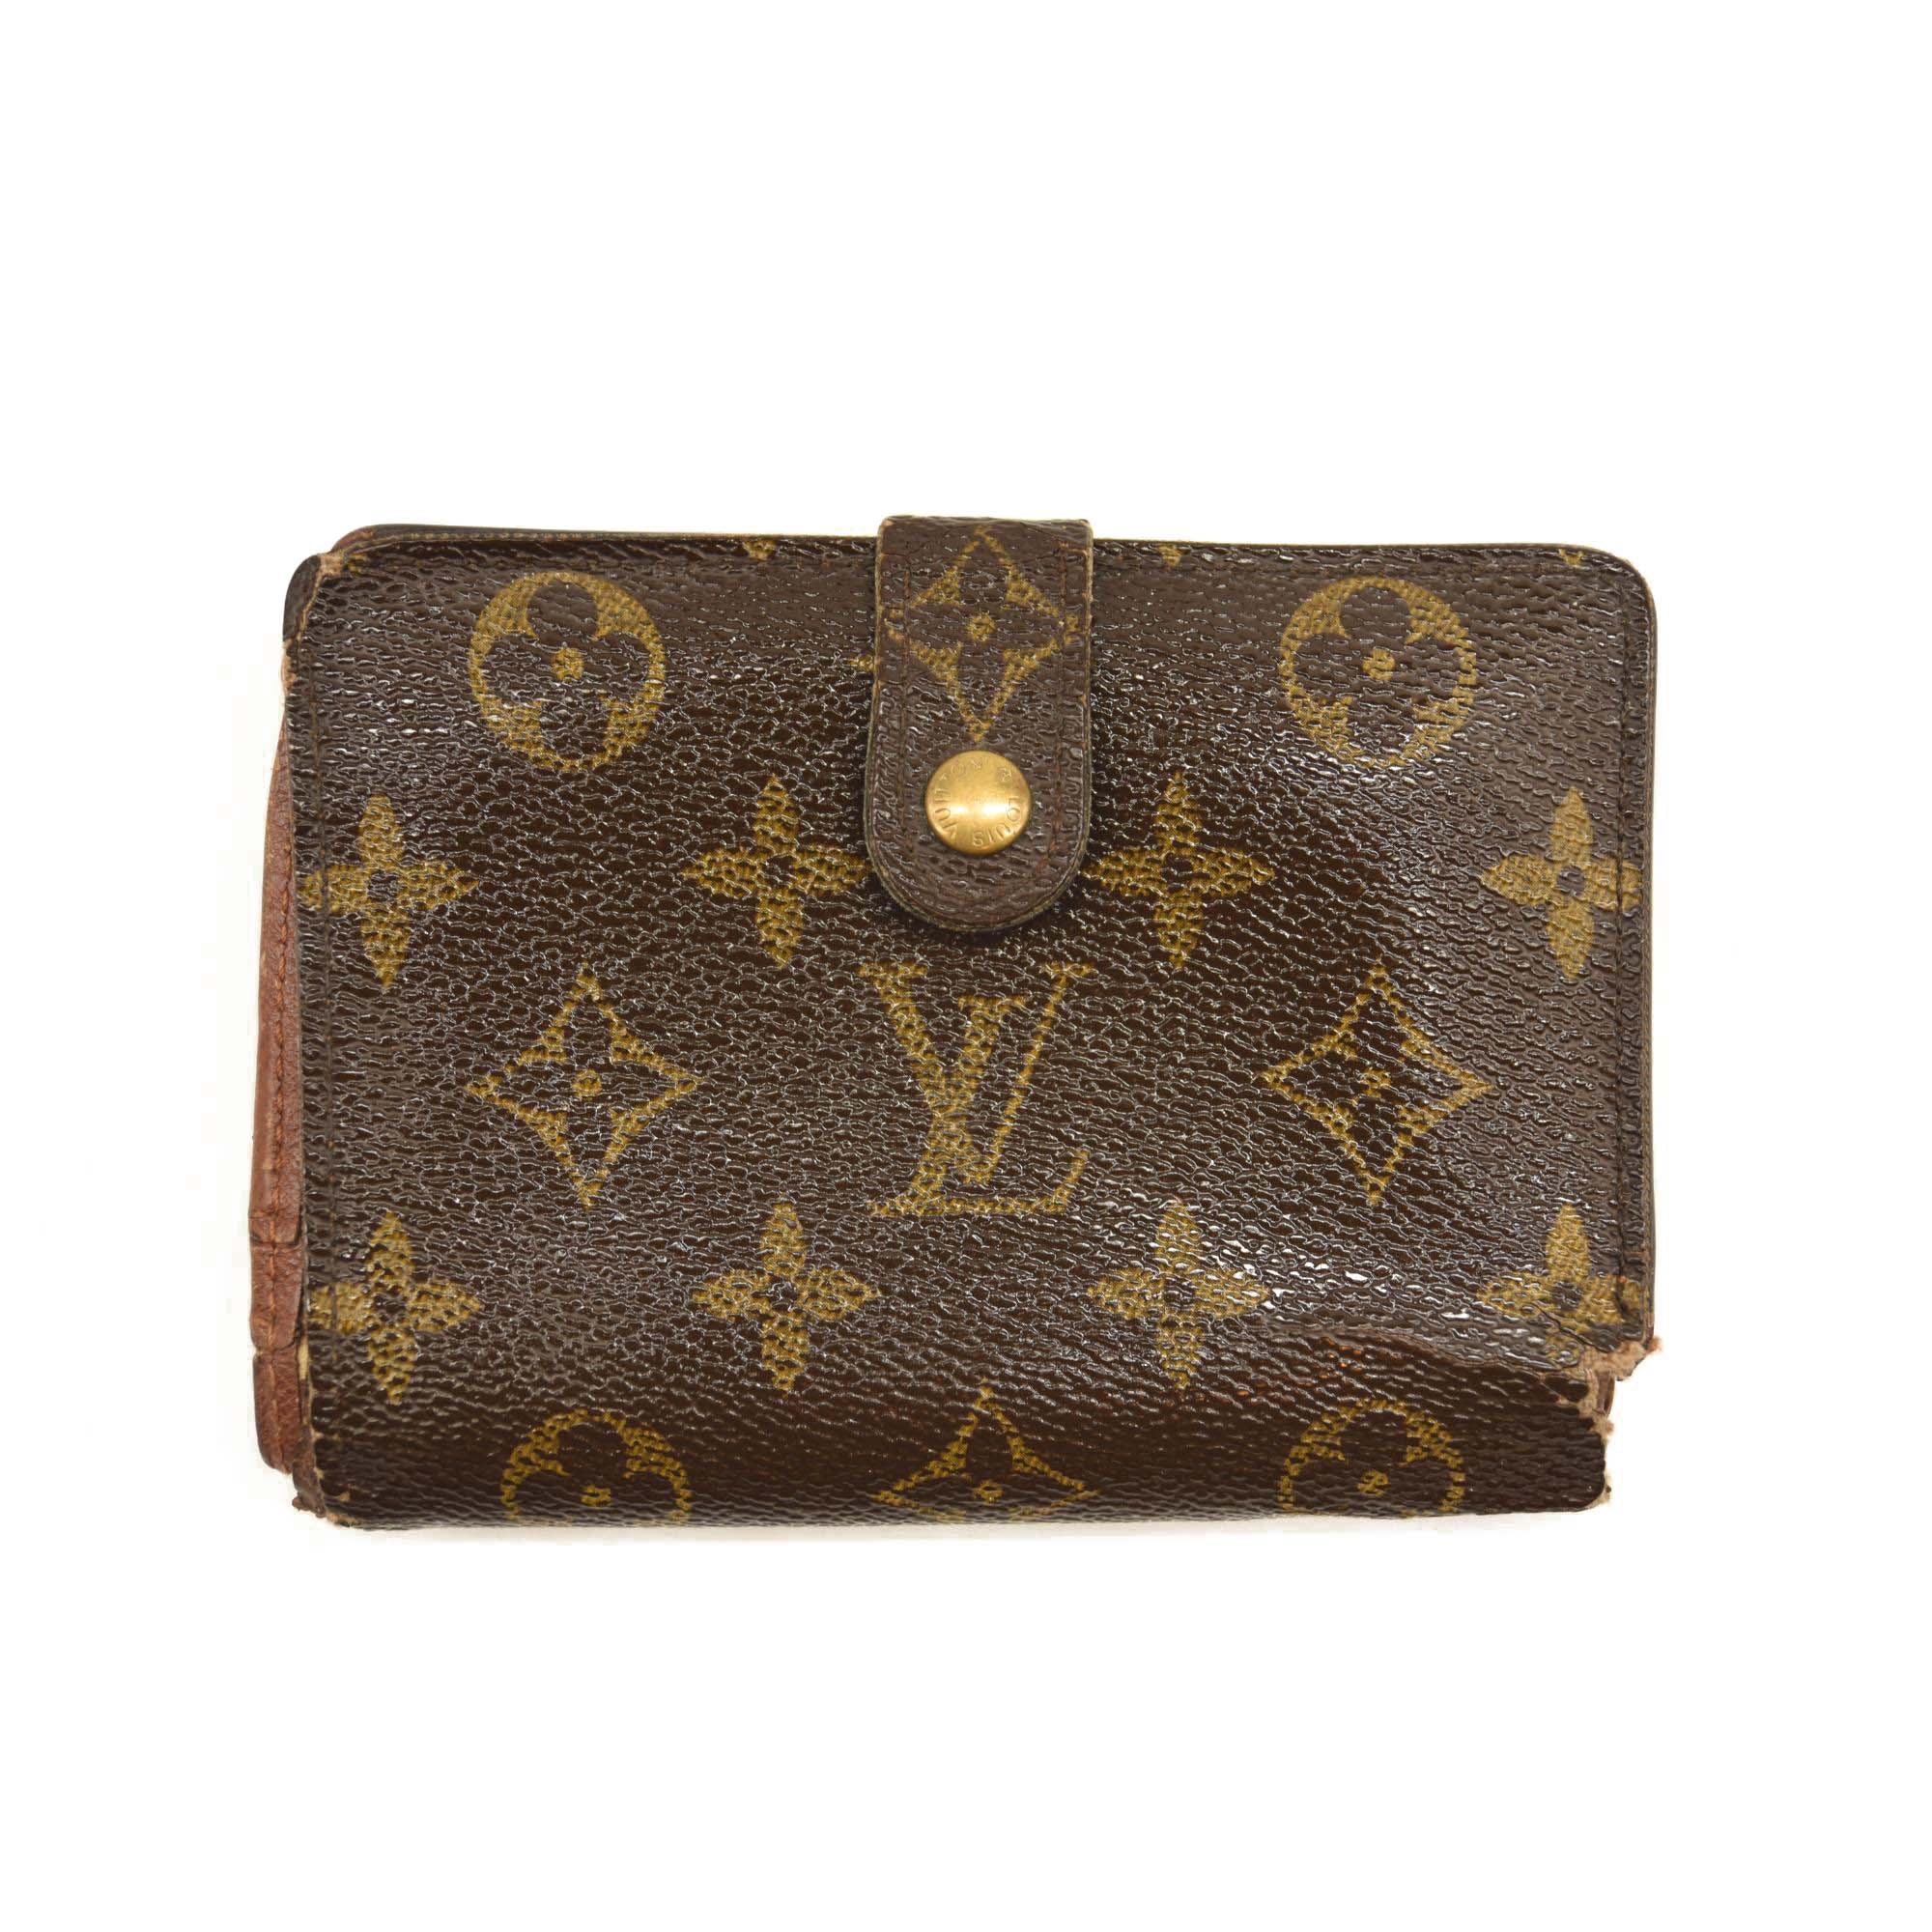 Sell Or Buy A Used Louis Vuitton Handbag | Natural Resource Department